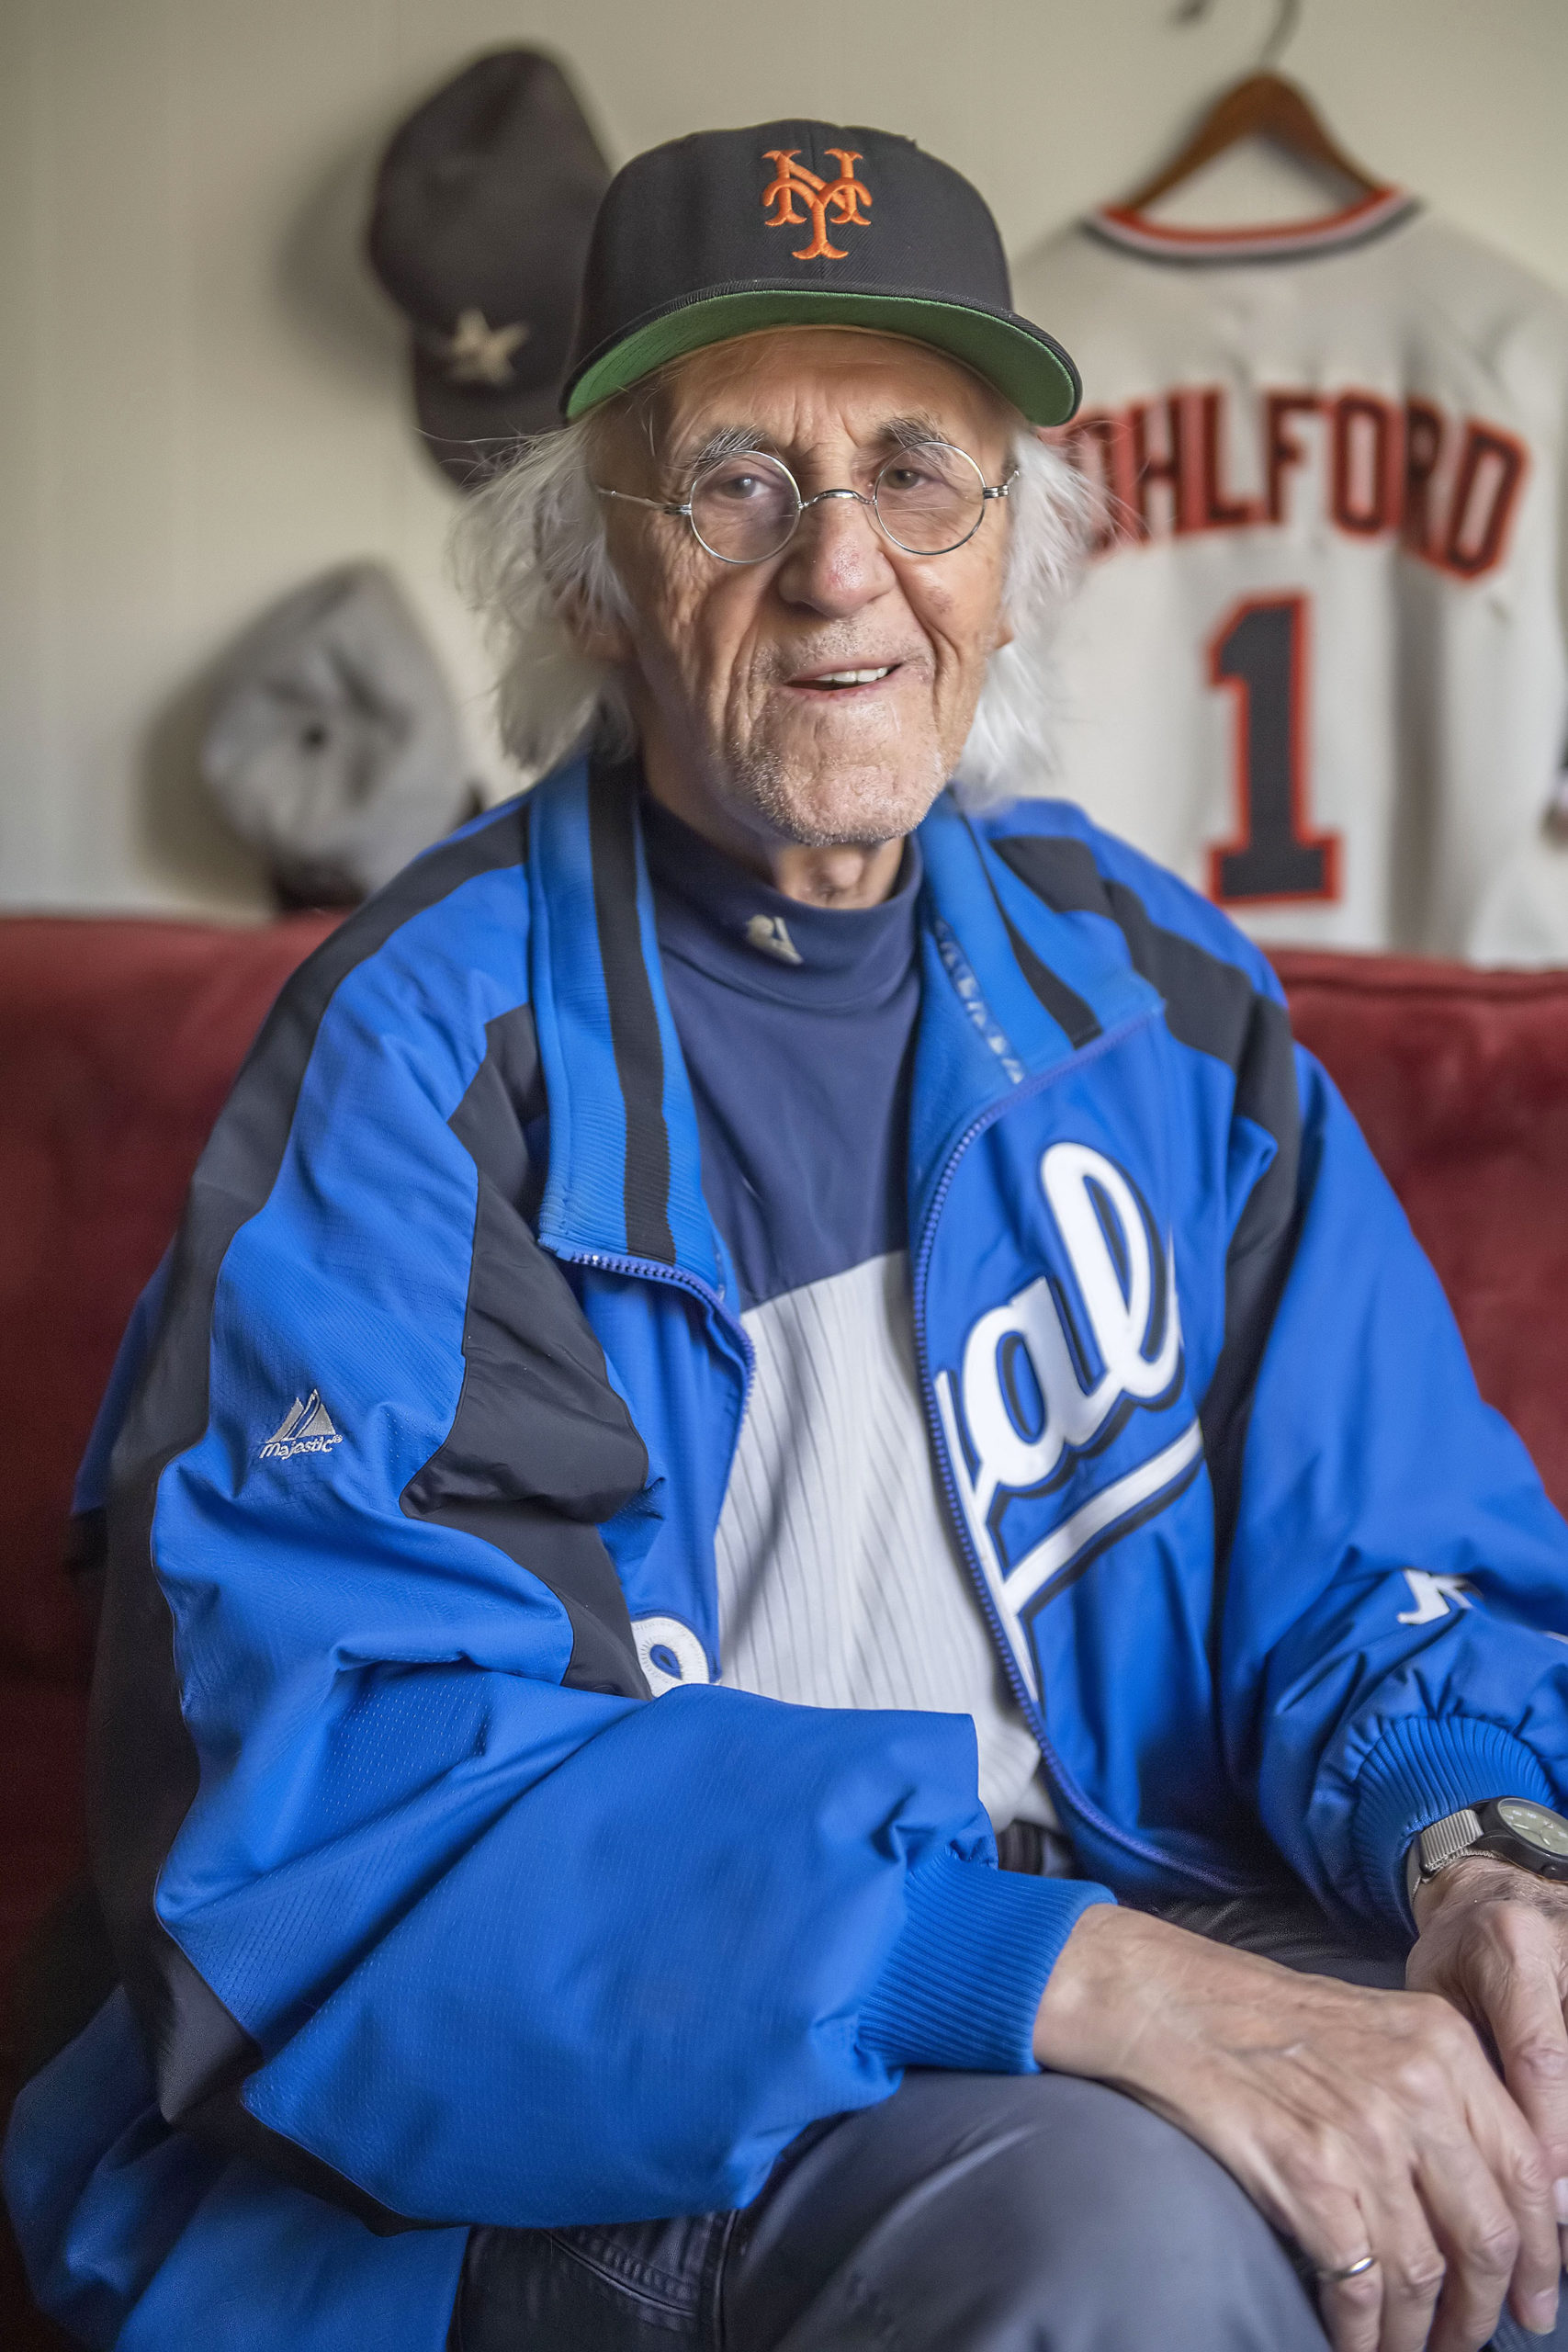 Hugh King, the East Hampton Press 2021 Person of the Year, in his baseball room at home in Amagansett.